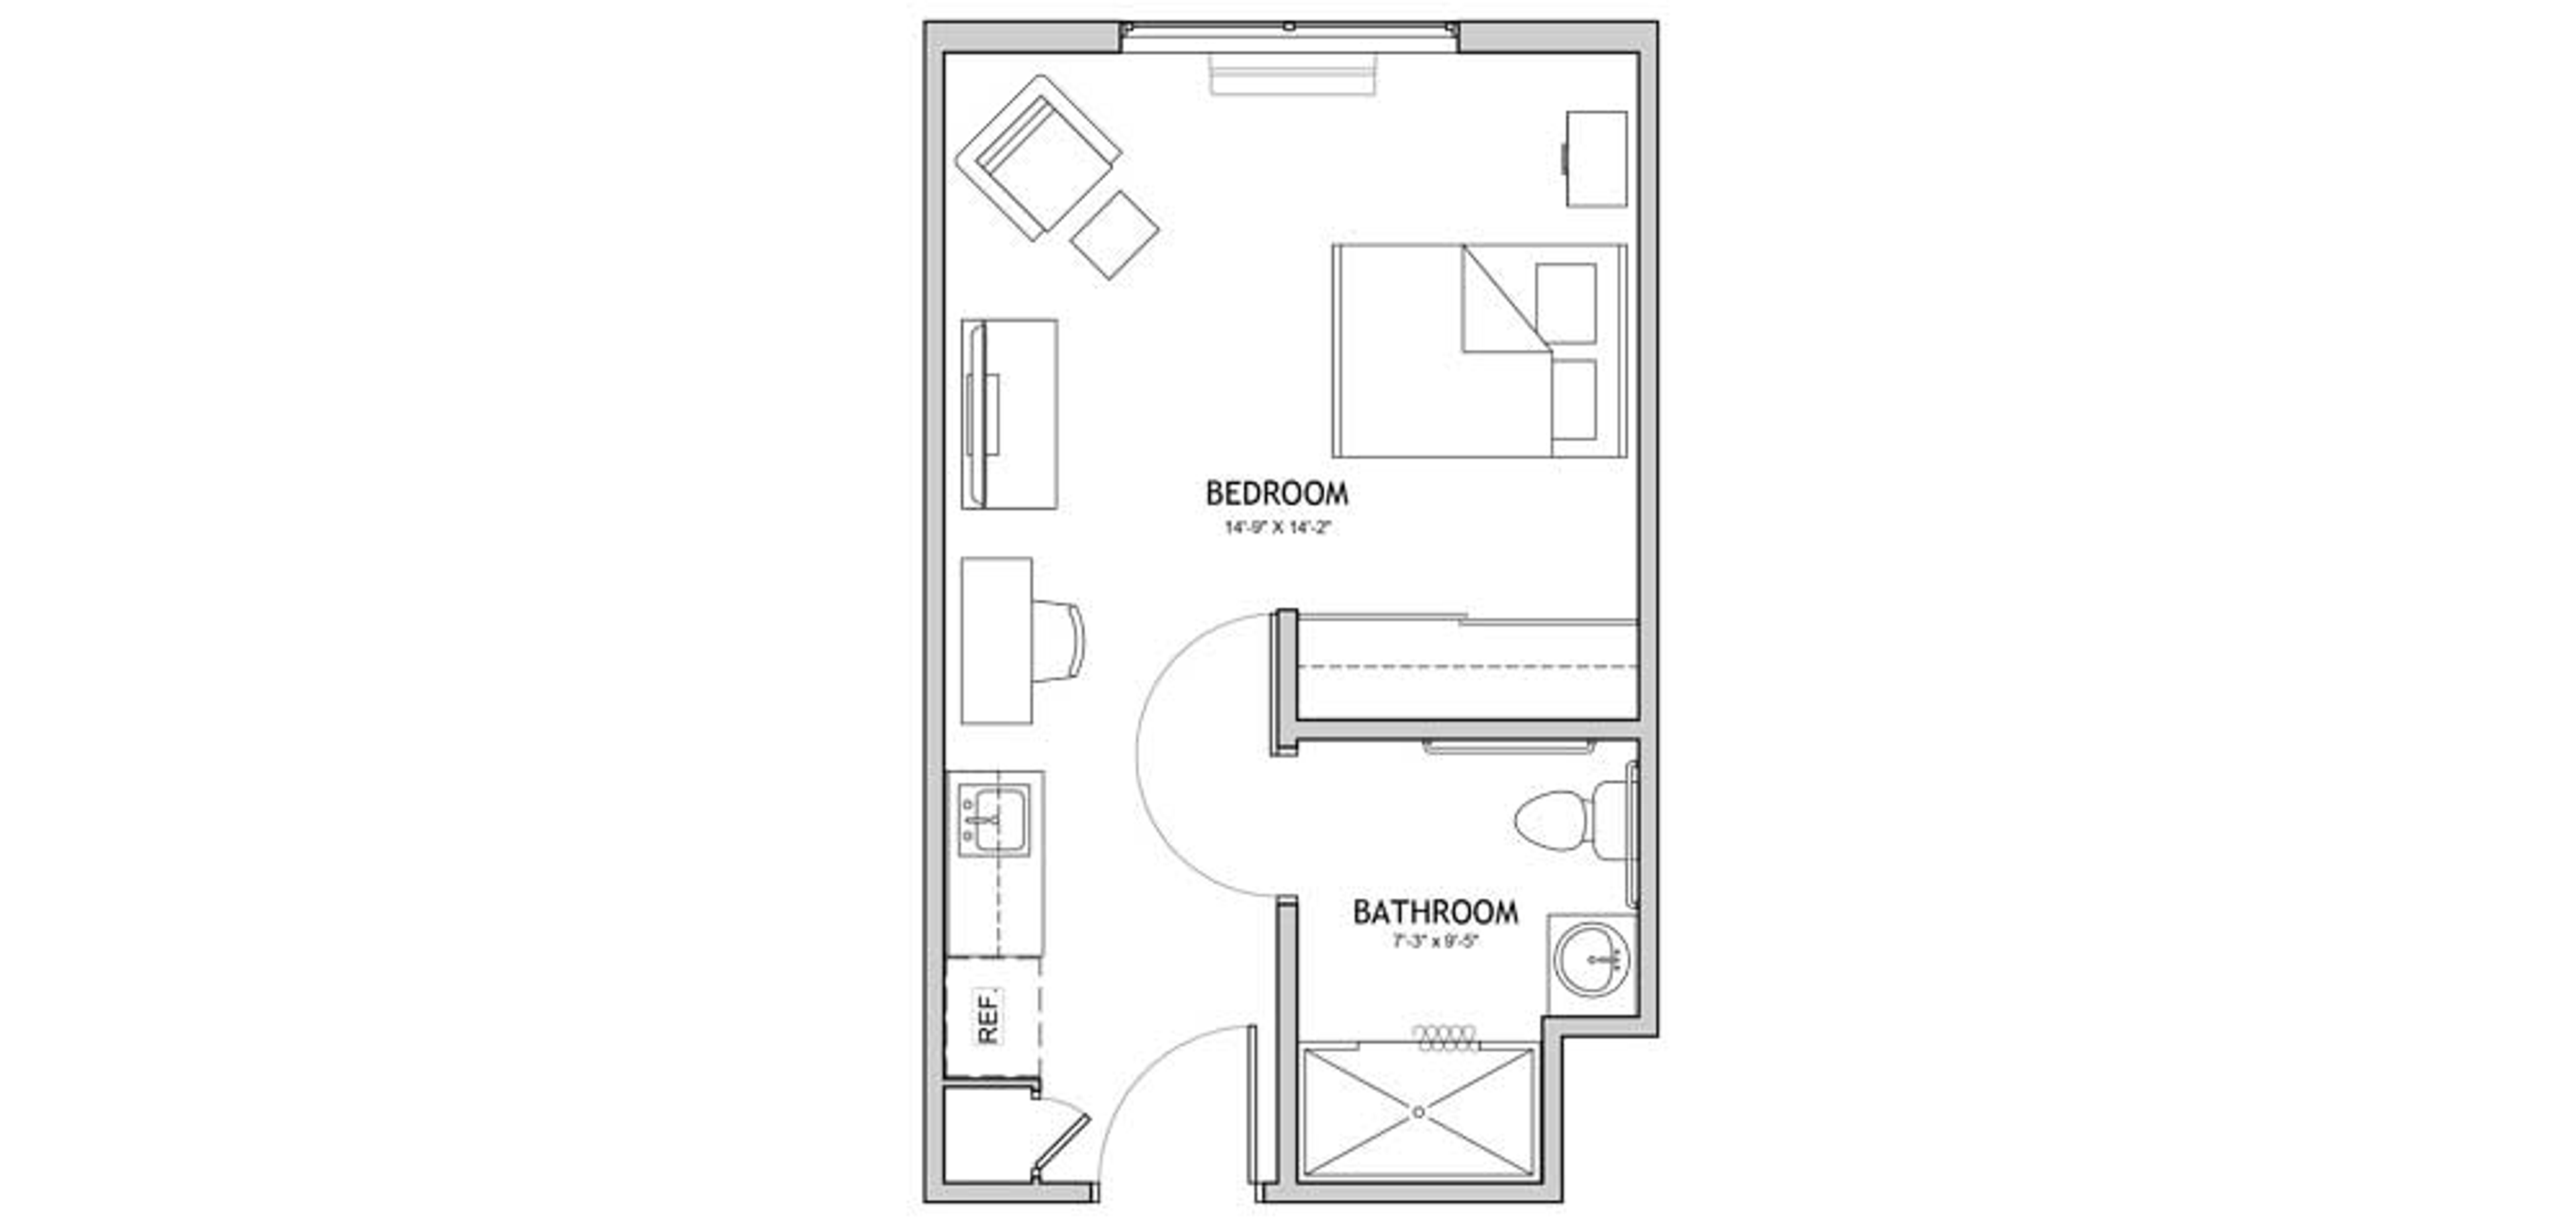 Floorplan - The Auberge at North Ogden - 1 bed, 1 bath, 372 sq. ft. Assisted Living